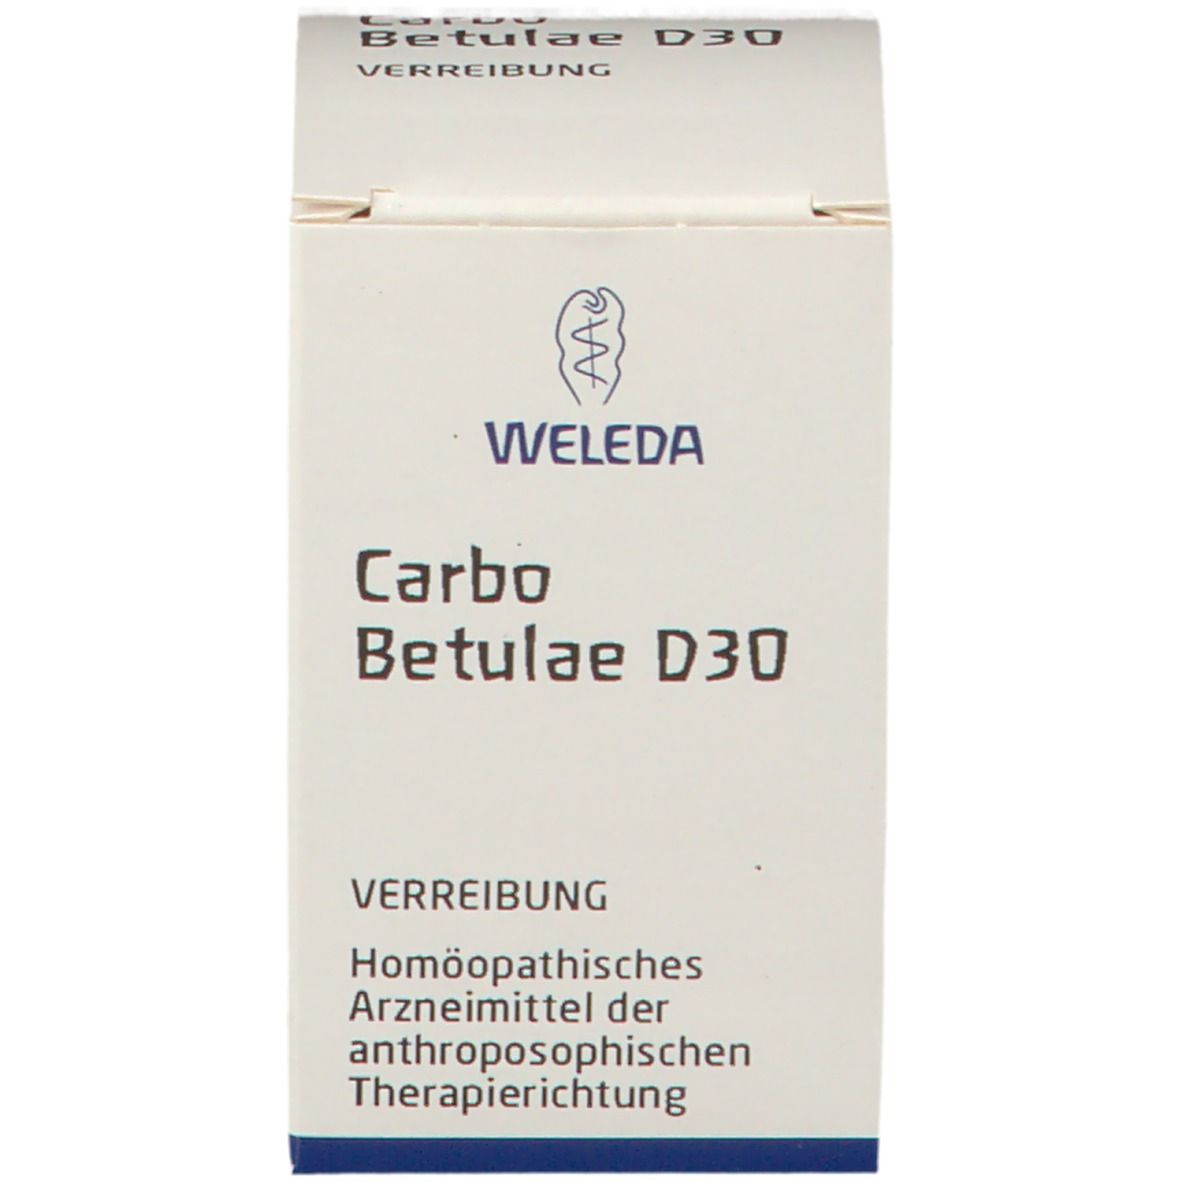 Carbo Betulae D30 Trituration